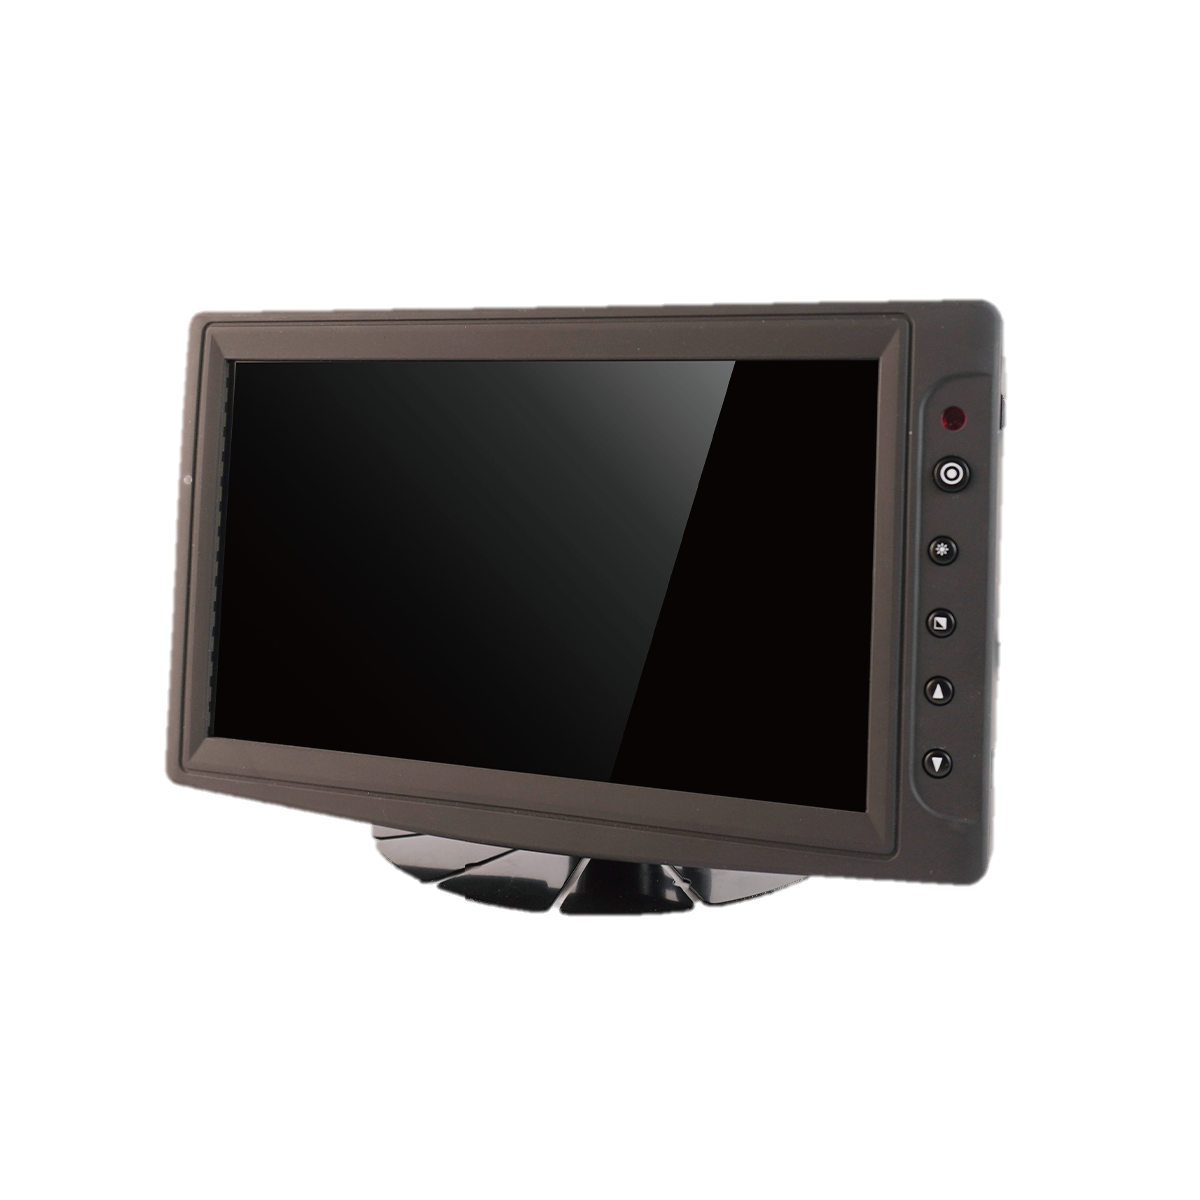 SEF800TPC(W)-L is an industrial touch monitor which can be used to any kinds of vehicles.